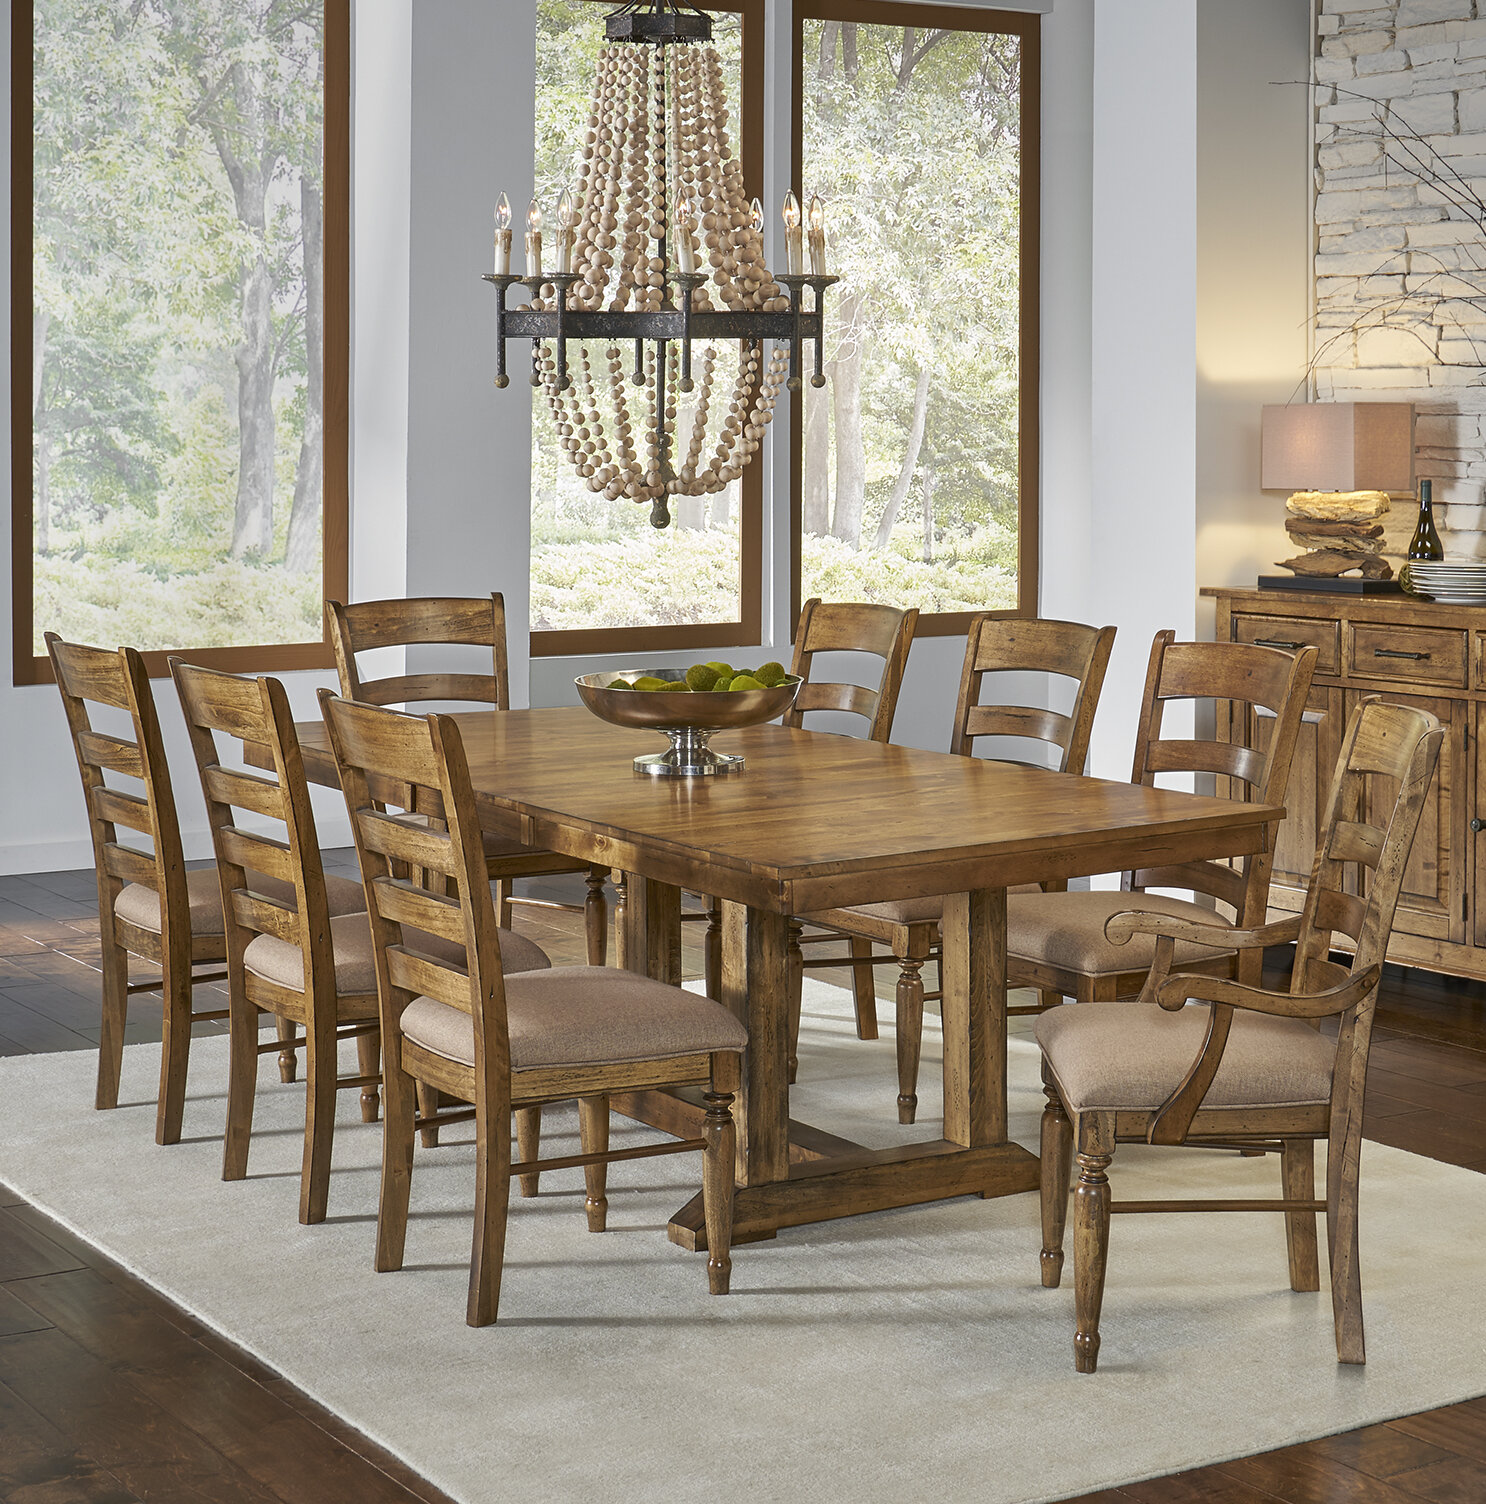 Dining Room Table 9 Piece - Homedesc